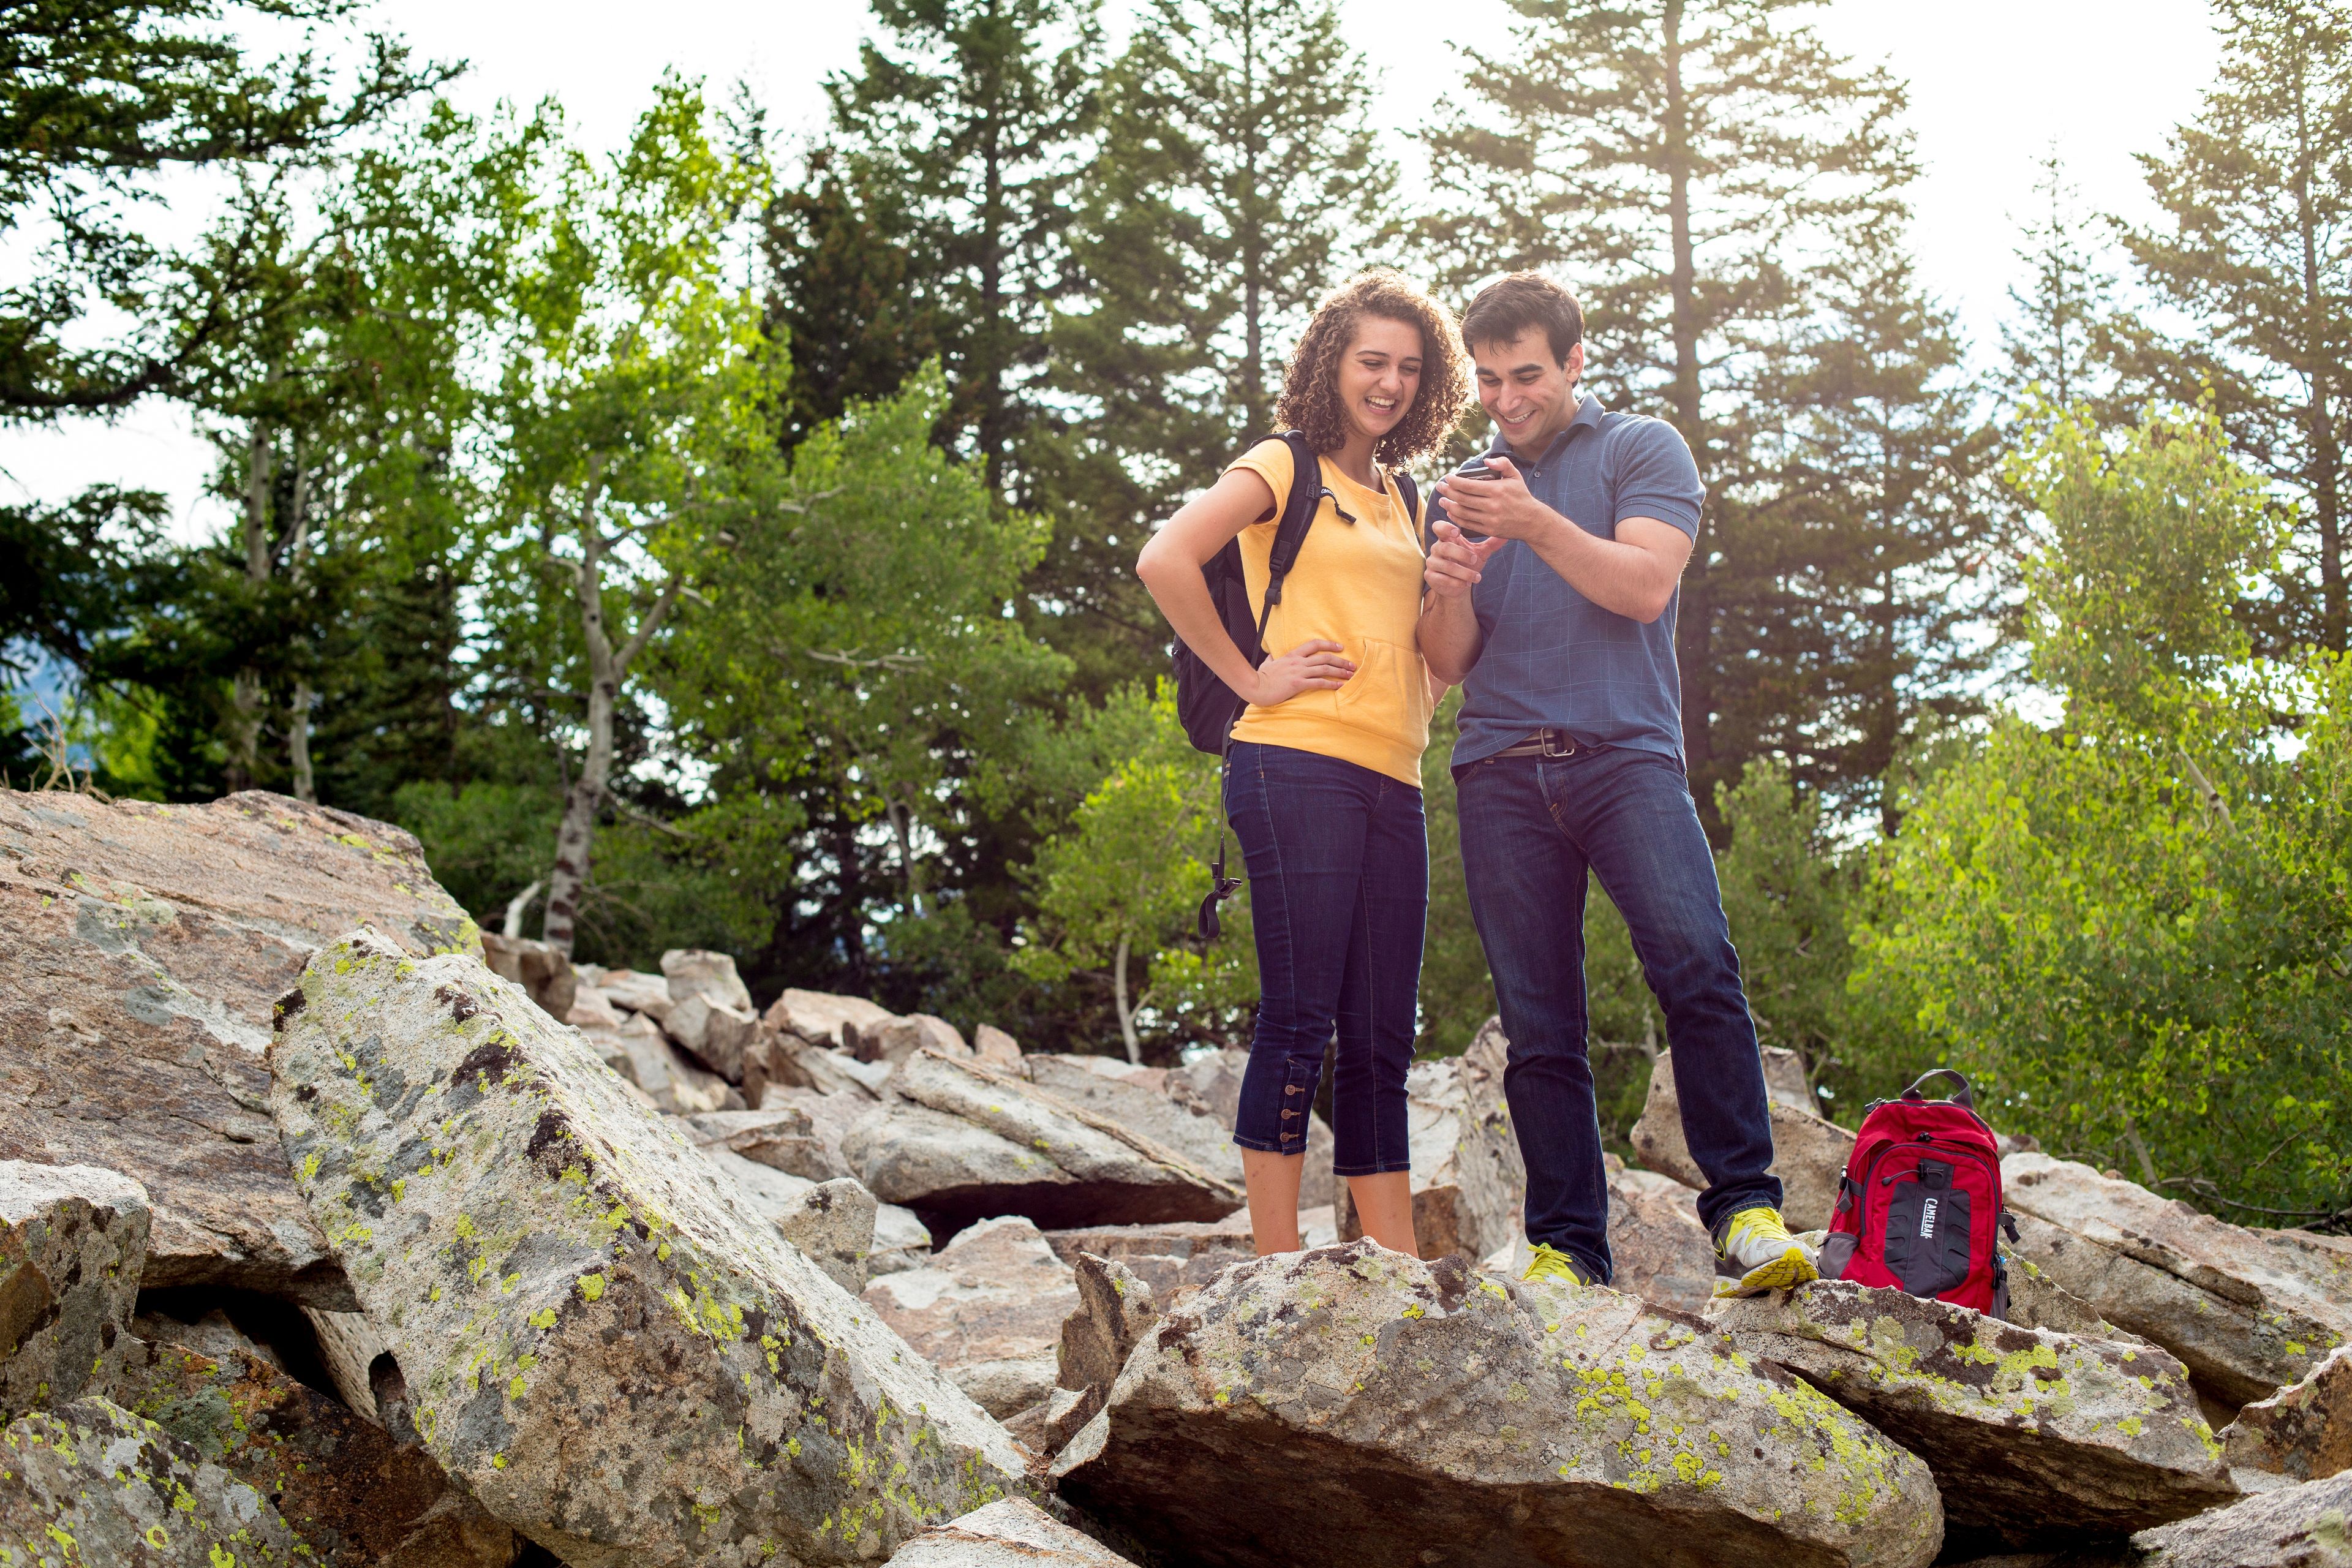 A man and woman look at a phone while hiking.